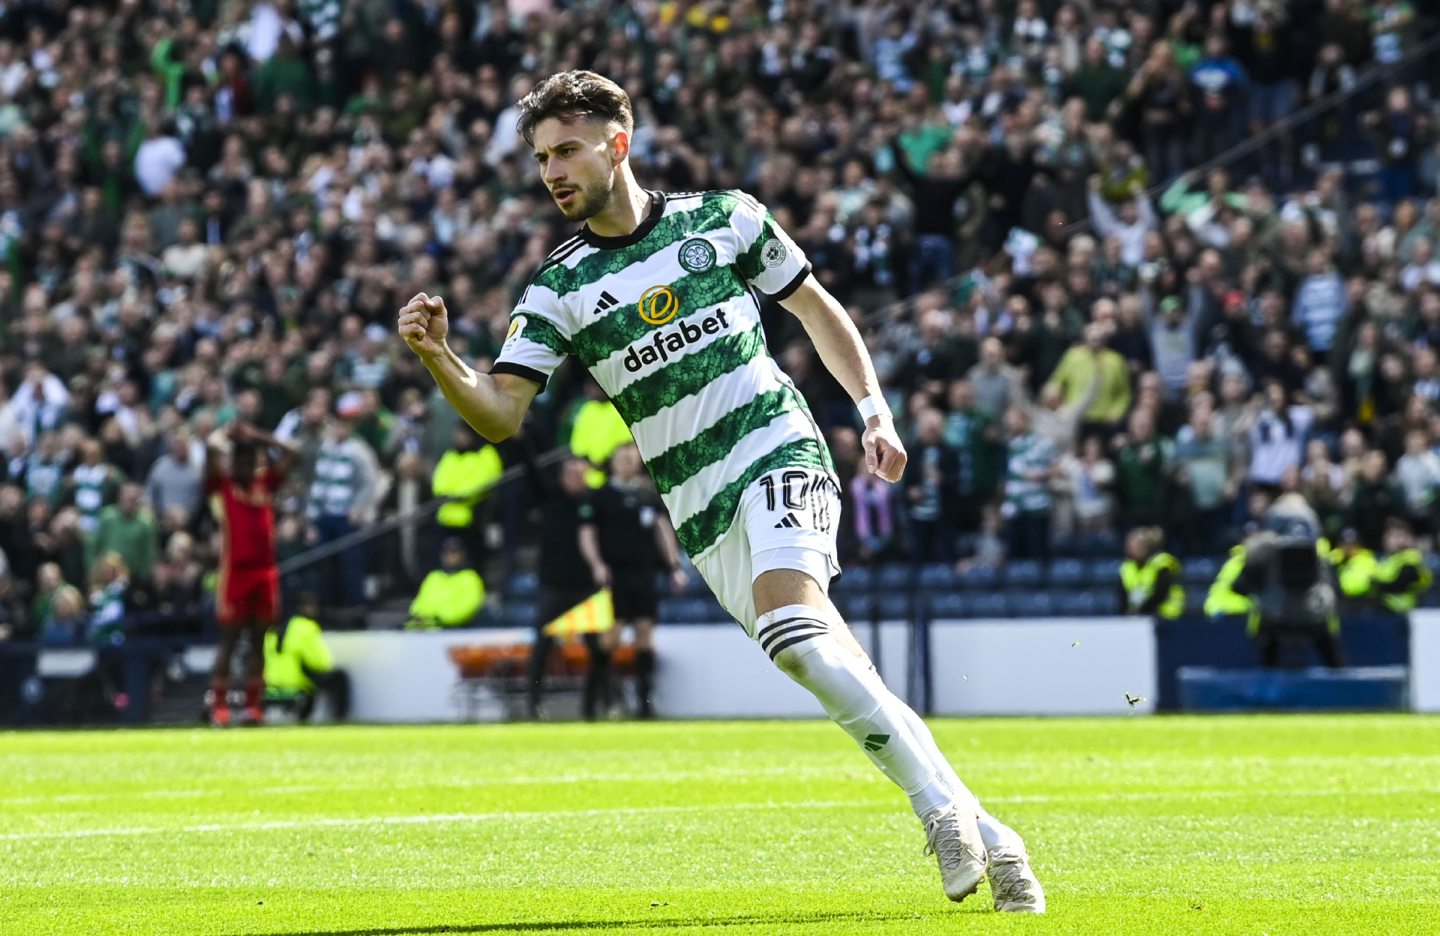 Celtic's Nicolas Kuhn celebrates as he scores to make it 1-1 during the Scottish Gas Scottish Cup semi-final. Image: SNS 